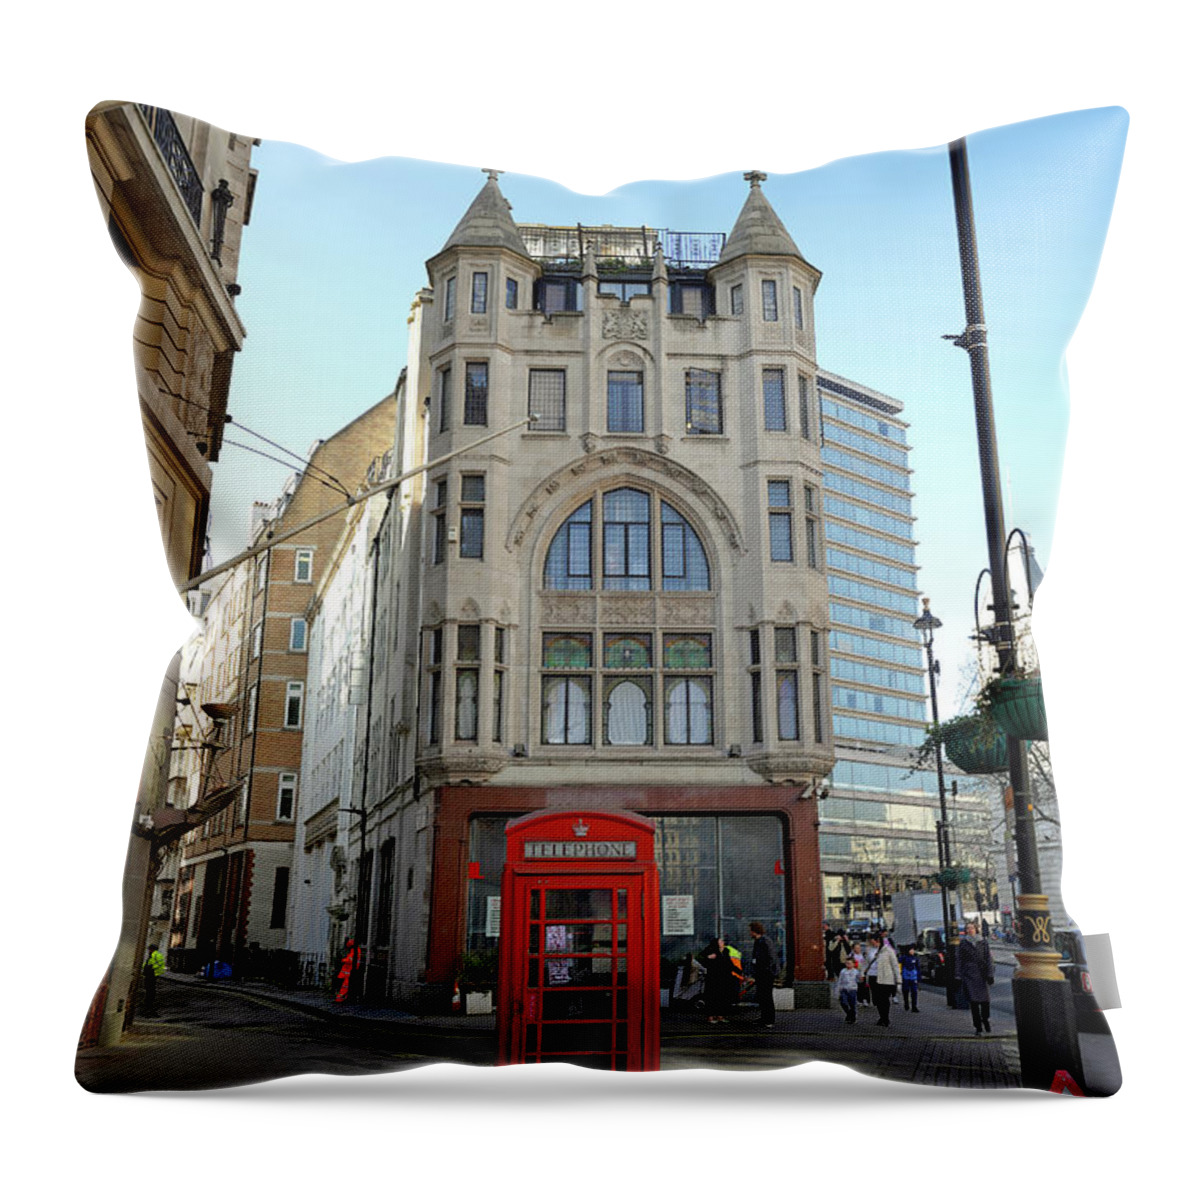 Red Telephone Booth Throw Pillow featuring the photograph Red Phone Booth In London England by Rick Rosenshein